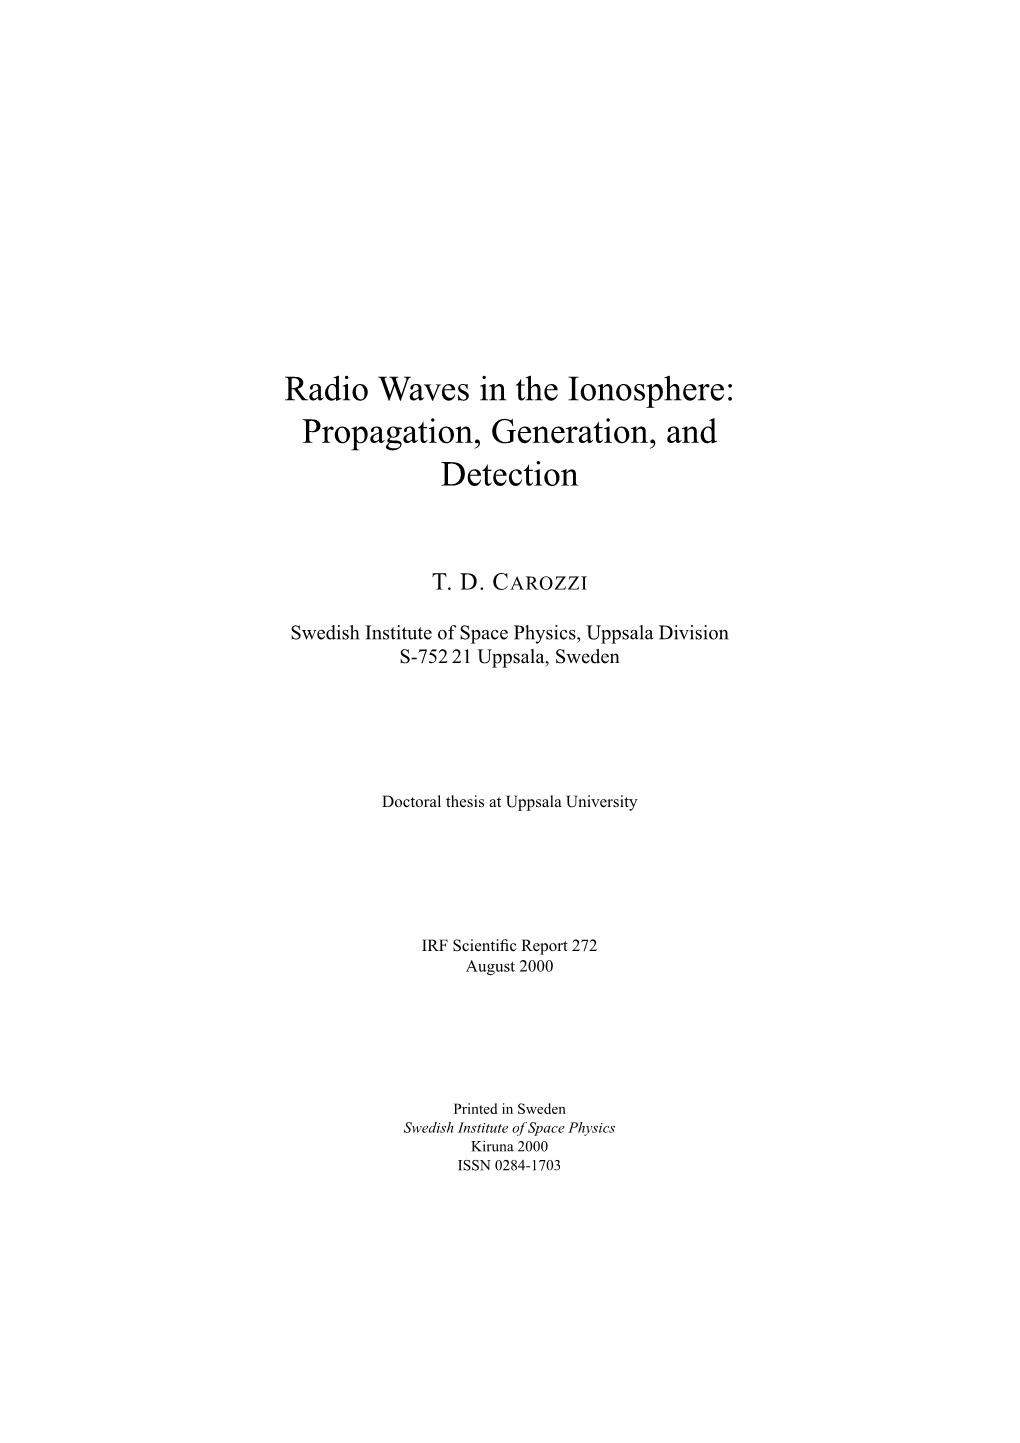 Radio Waves in the Ionosphere: Propagation, Generation, and Detection